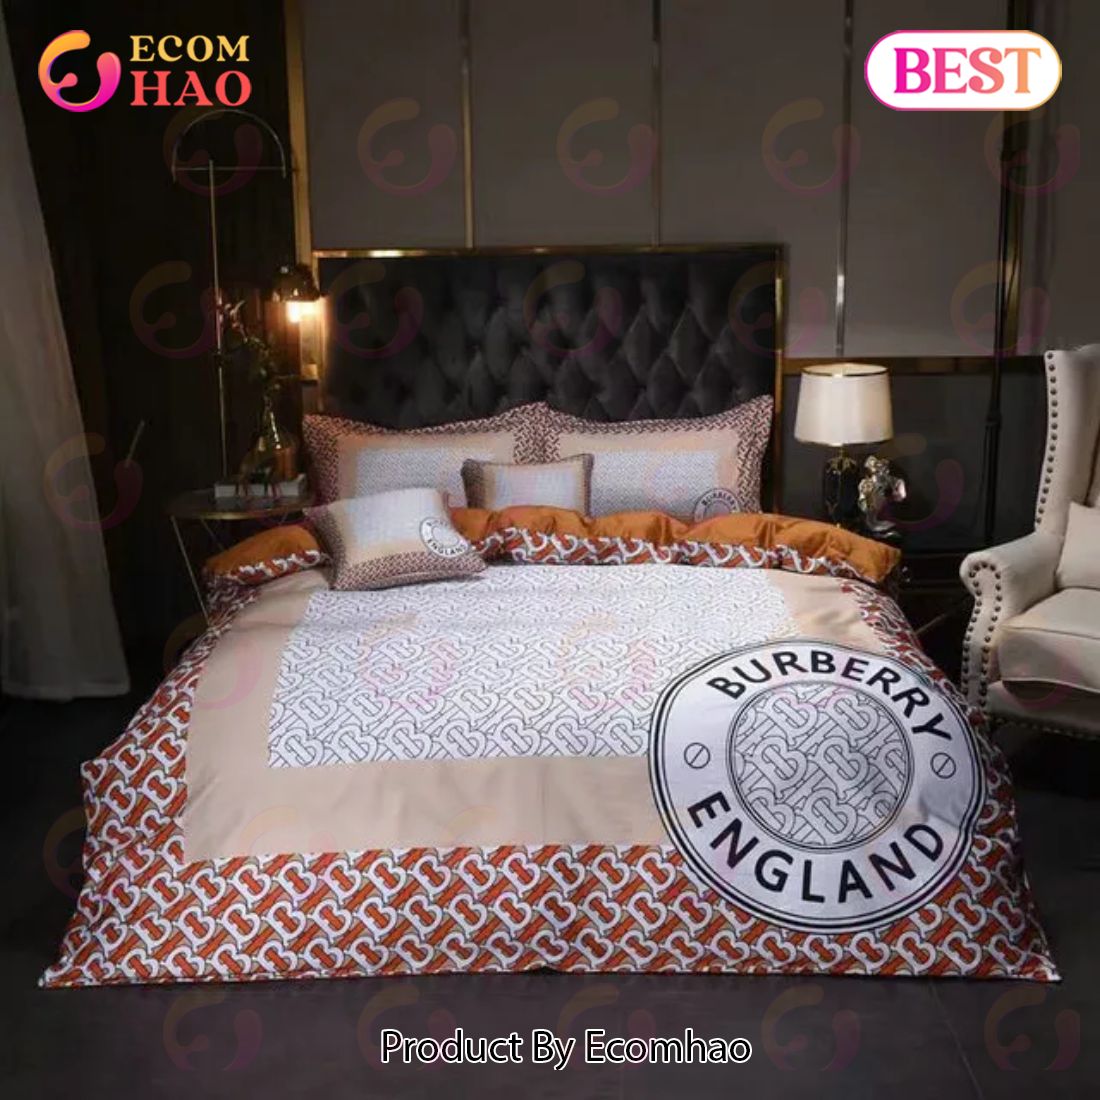 Burberry New Hot Bedding Sets 3D Printed Bedding Sets Quilt Sets Duvet Cover Luxury Brand Bedding Decor Bedroom Sets Best Luxury Bed Sets Gift Thankgivings And Christmas